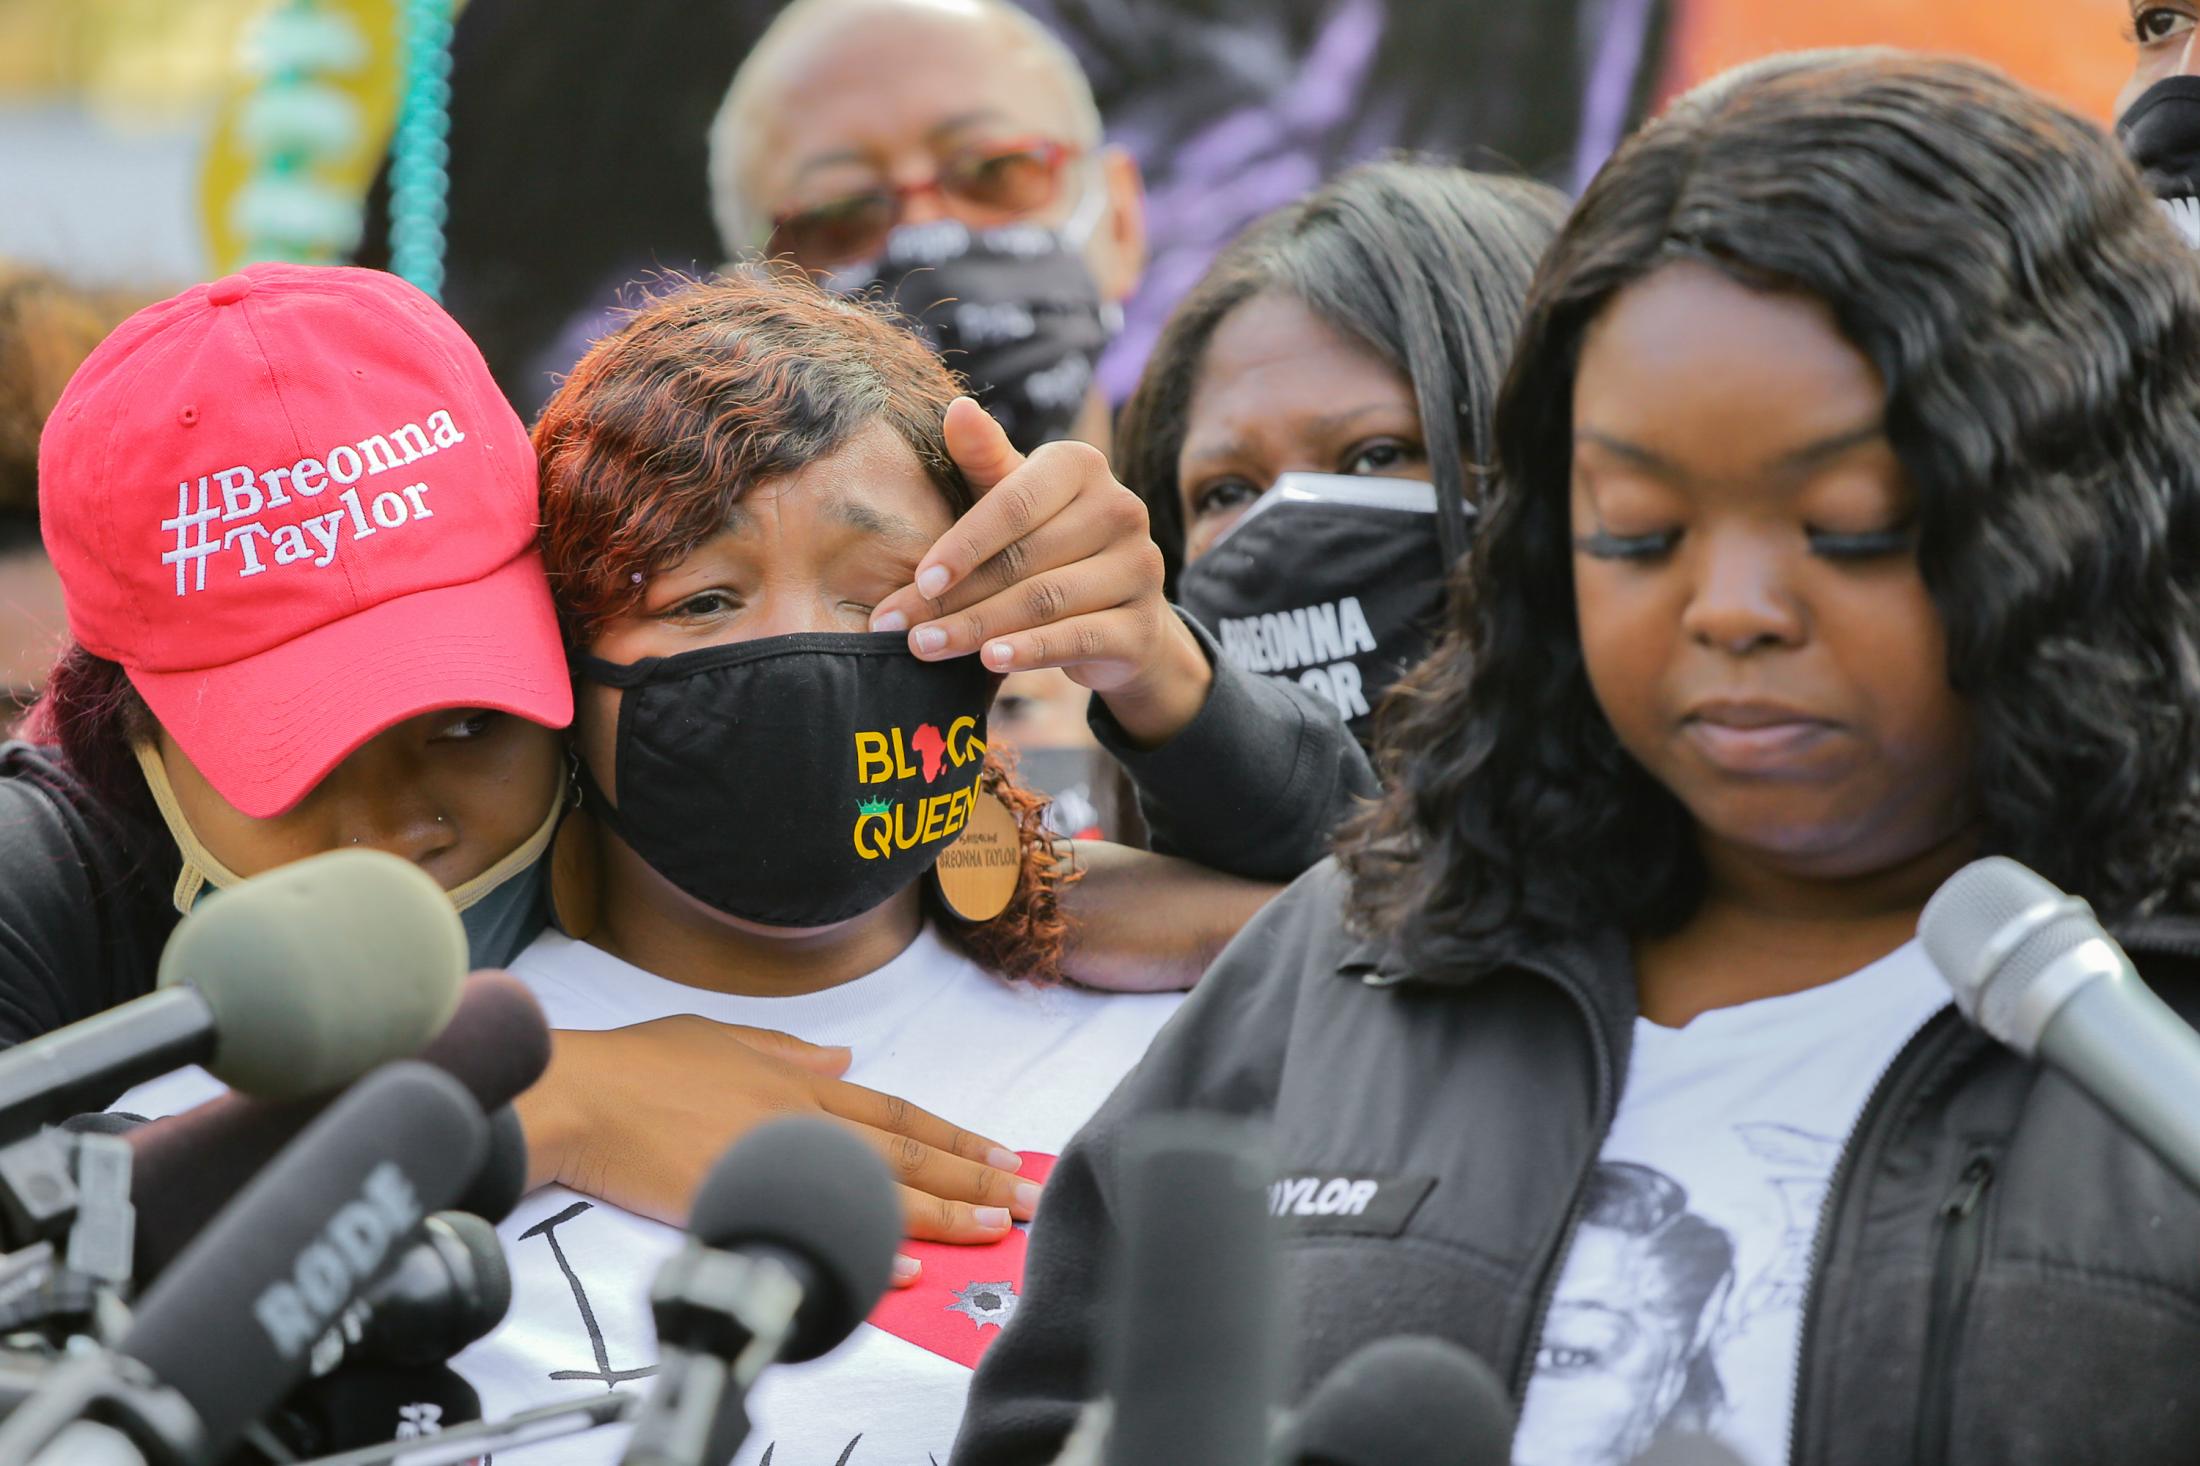 Breonna Taylor&#39;s sister Ju&#39;Niyah Palmer, left, wipes tears from her mother Tamika Palmer&#39;s eyes during a press conference while Taylor&#39;s aunt, Bianca Taylor read a message from the family while wearing Breonna Taylor&#39;s EMS jacket on Sept. 25, 2020, in Jefferson Square Park. &quot;I was reassured on Wednesday of why I have no faith in the legal system, the police and the law that are not made to protect us black and brown people, but when I speak on it I am considered an angry black woman&quot;, Bianca Taylor said about the grand jury decision earlier in the week.